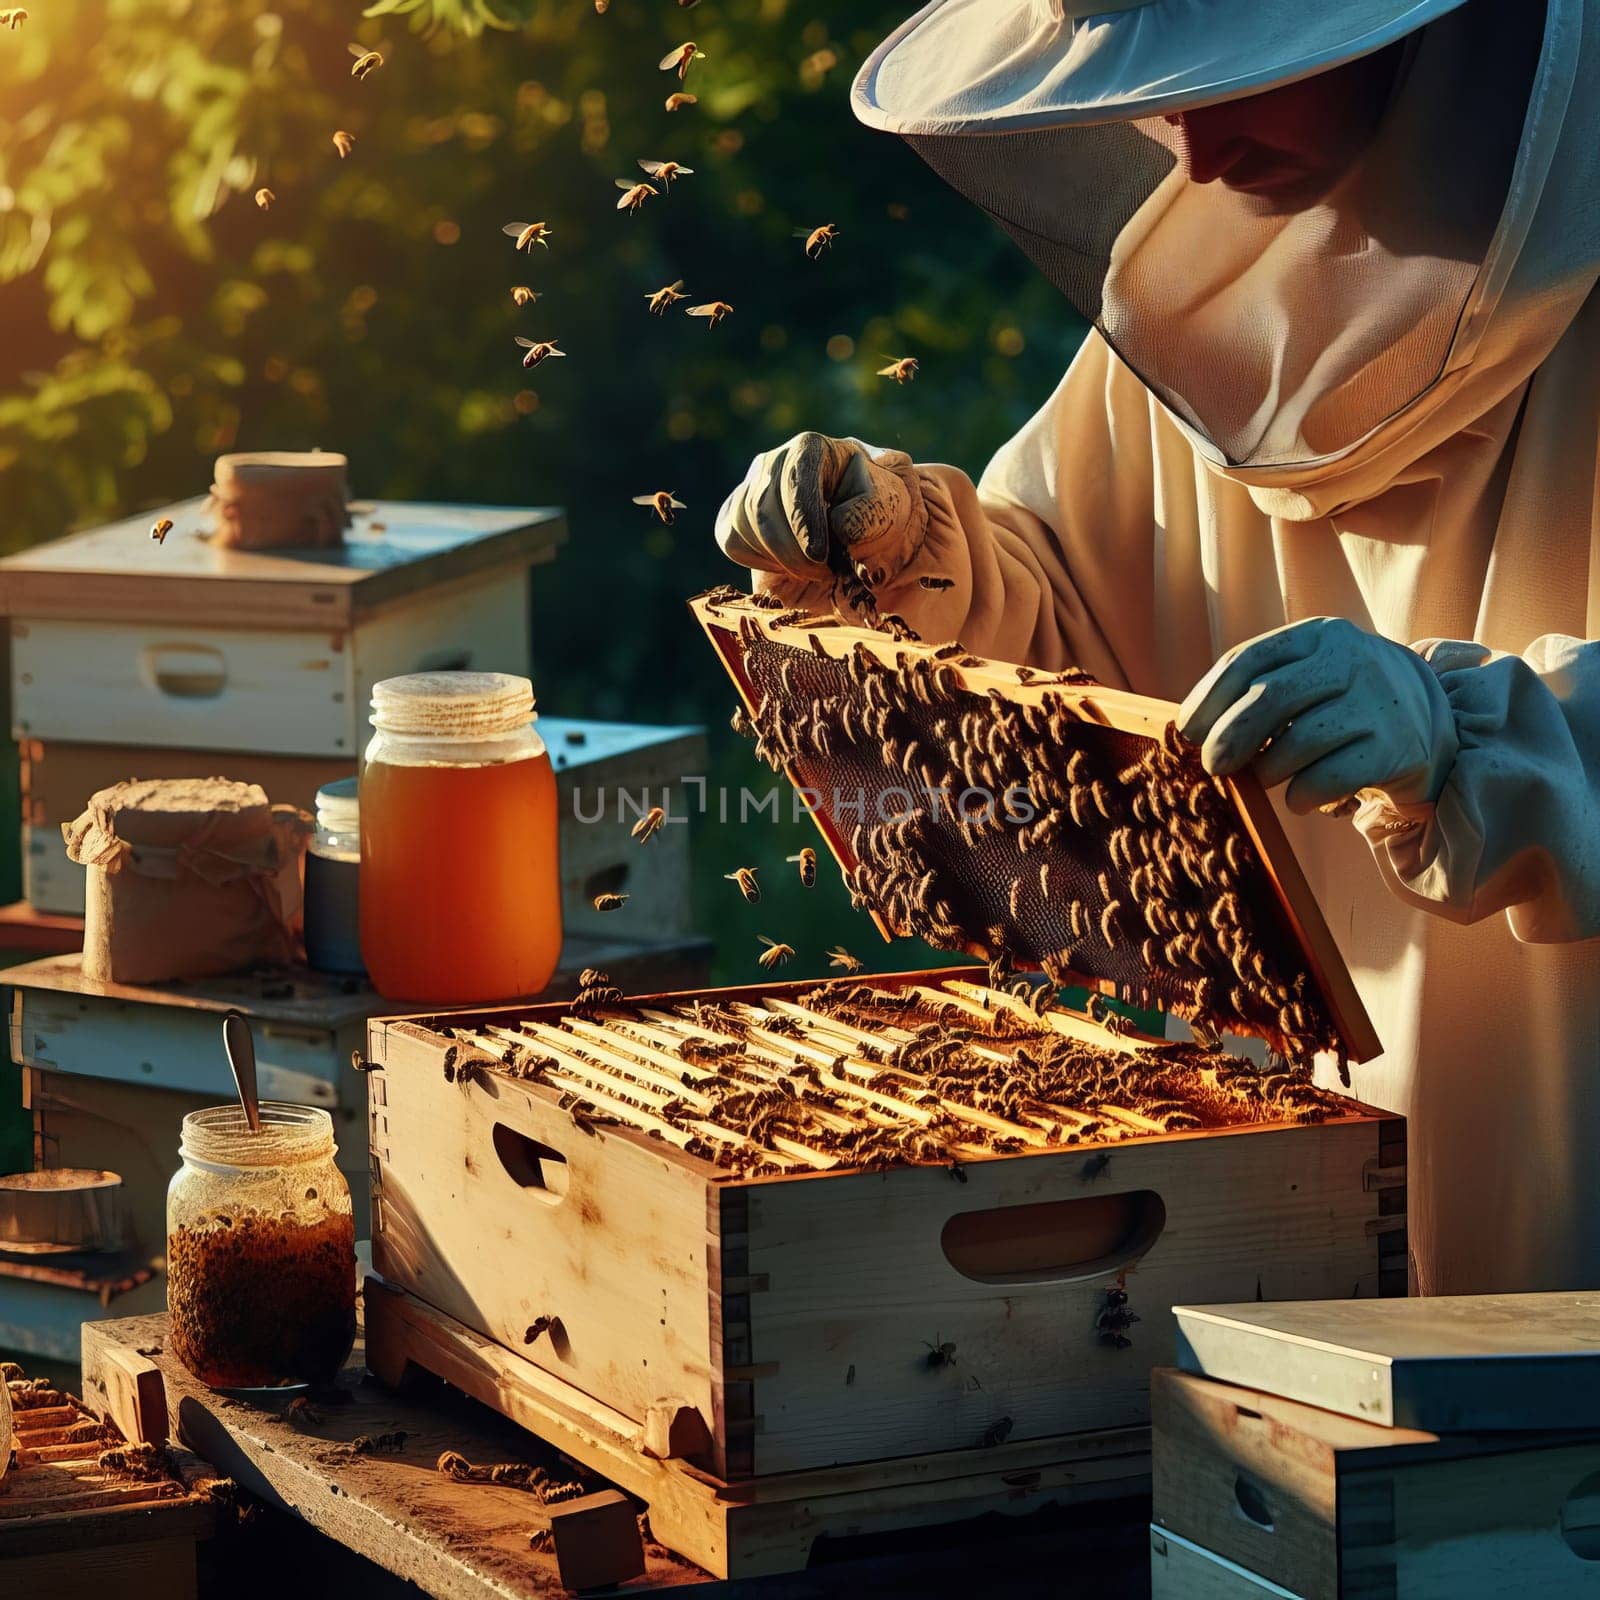 Beekeeper in protective gear inspecting a honeycomb frame, with bees flying around and jars of honey in the background. by sfinks